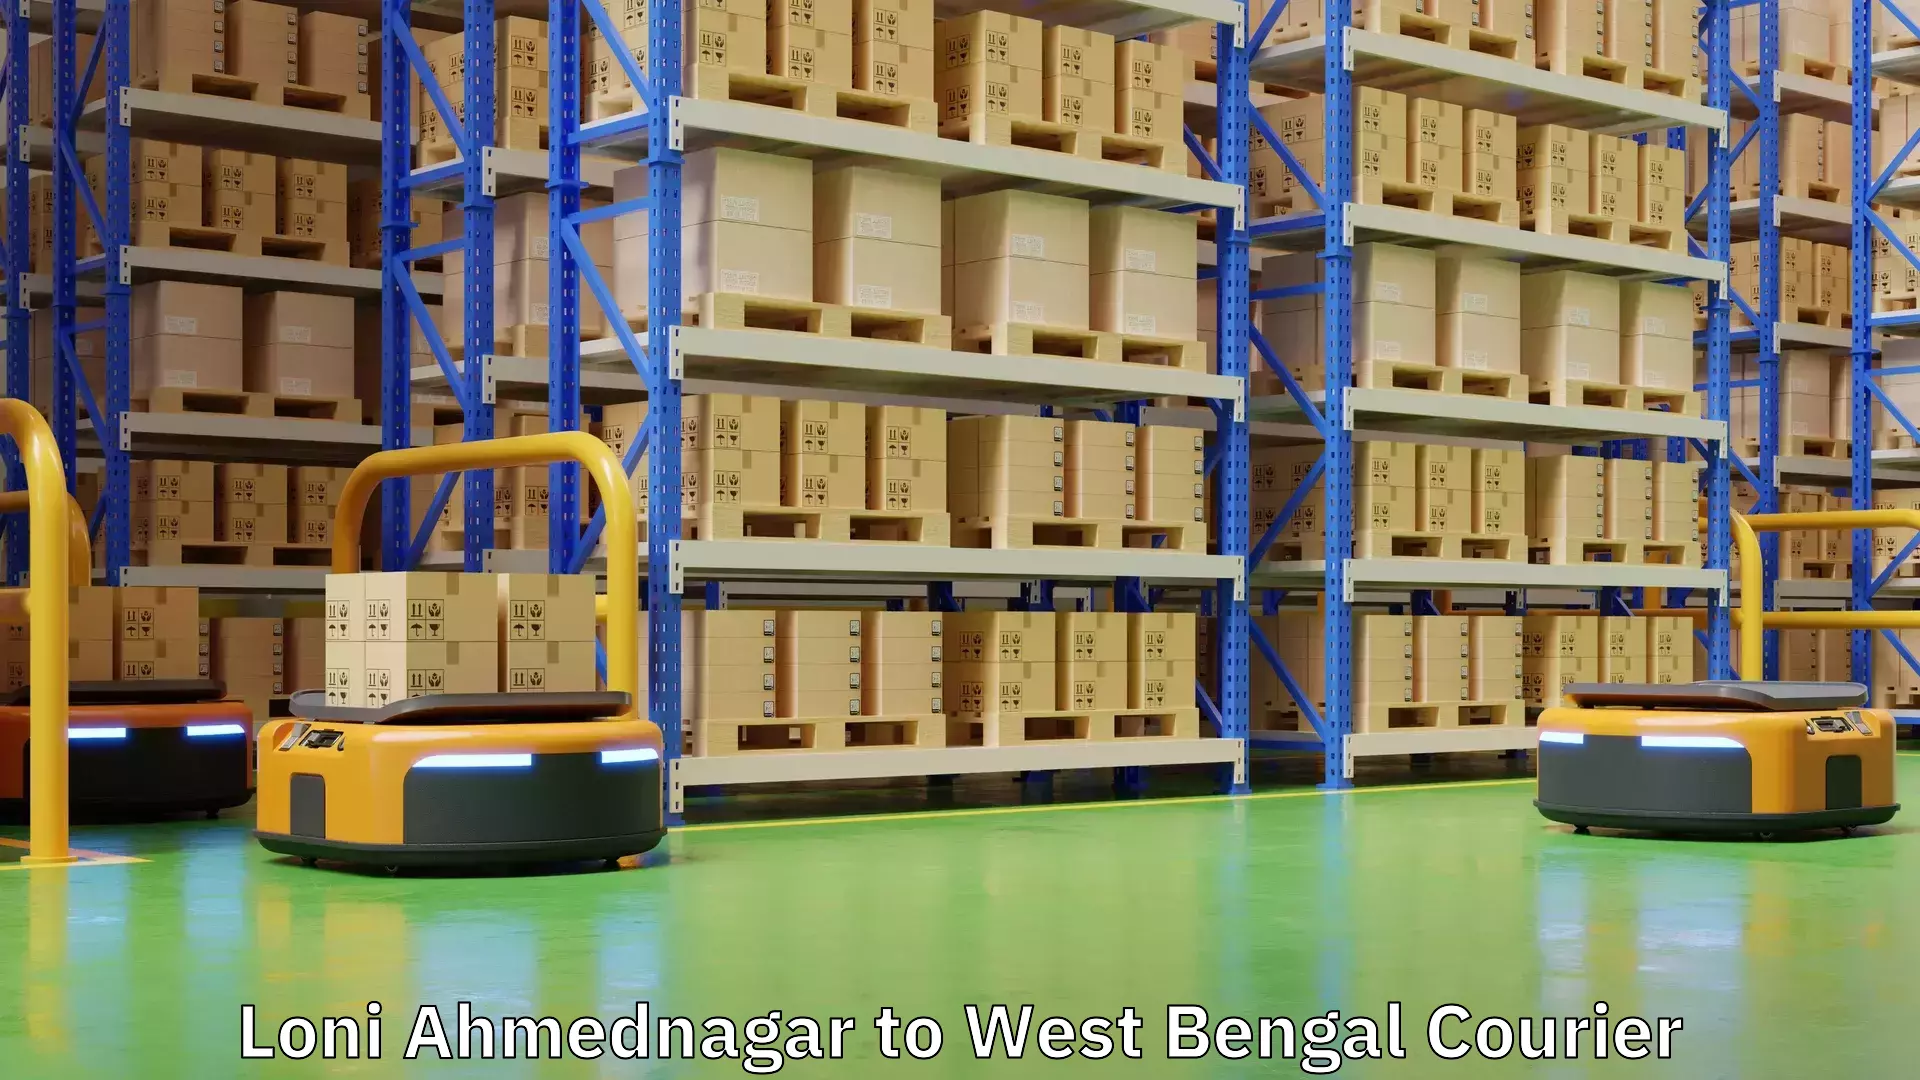 Ground shipping in Loni Ahmednagar to West Bengal